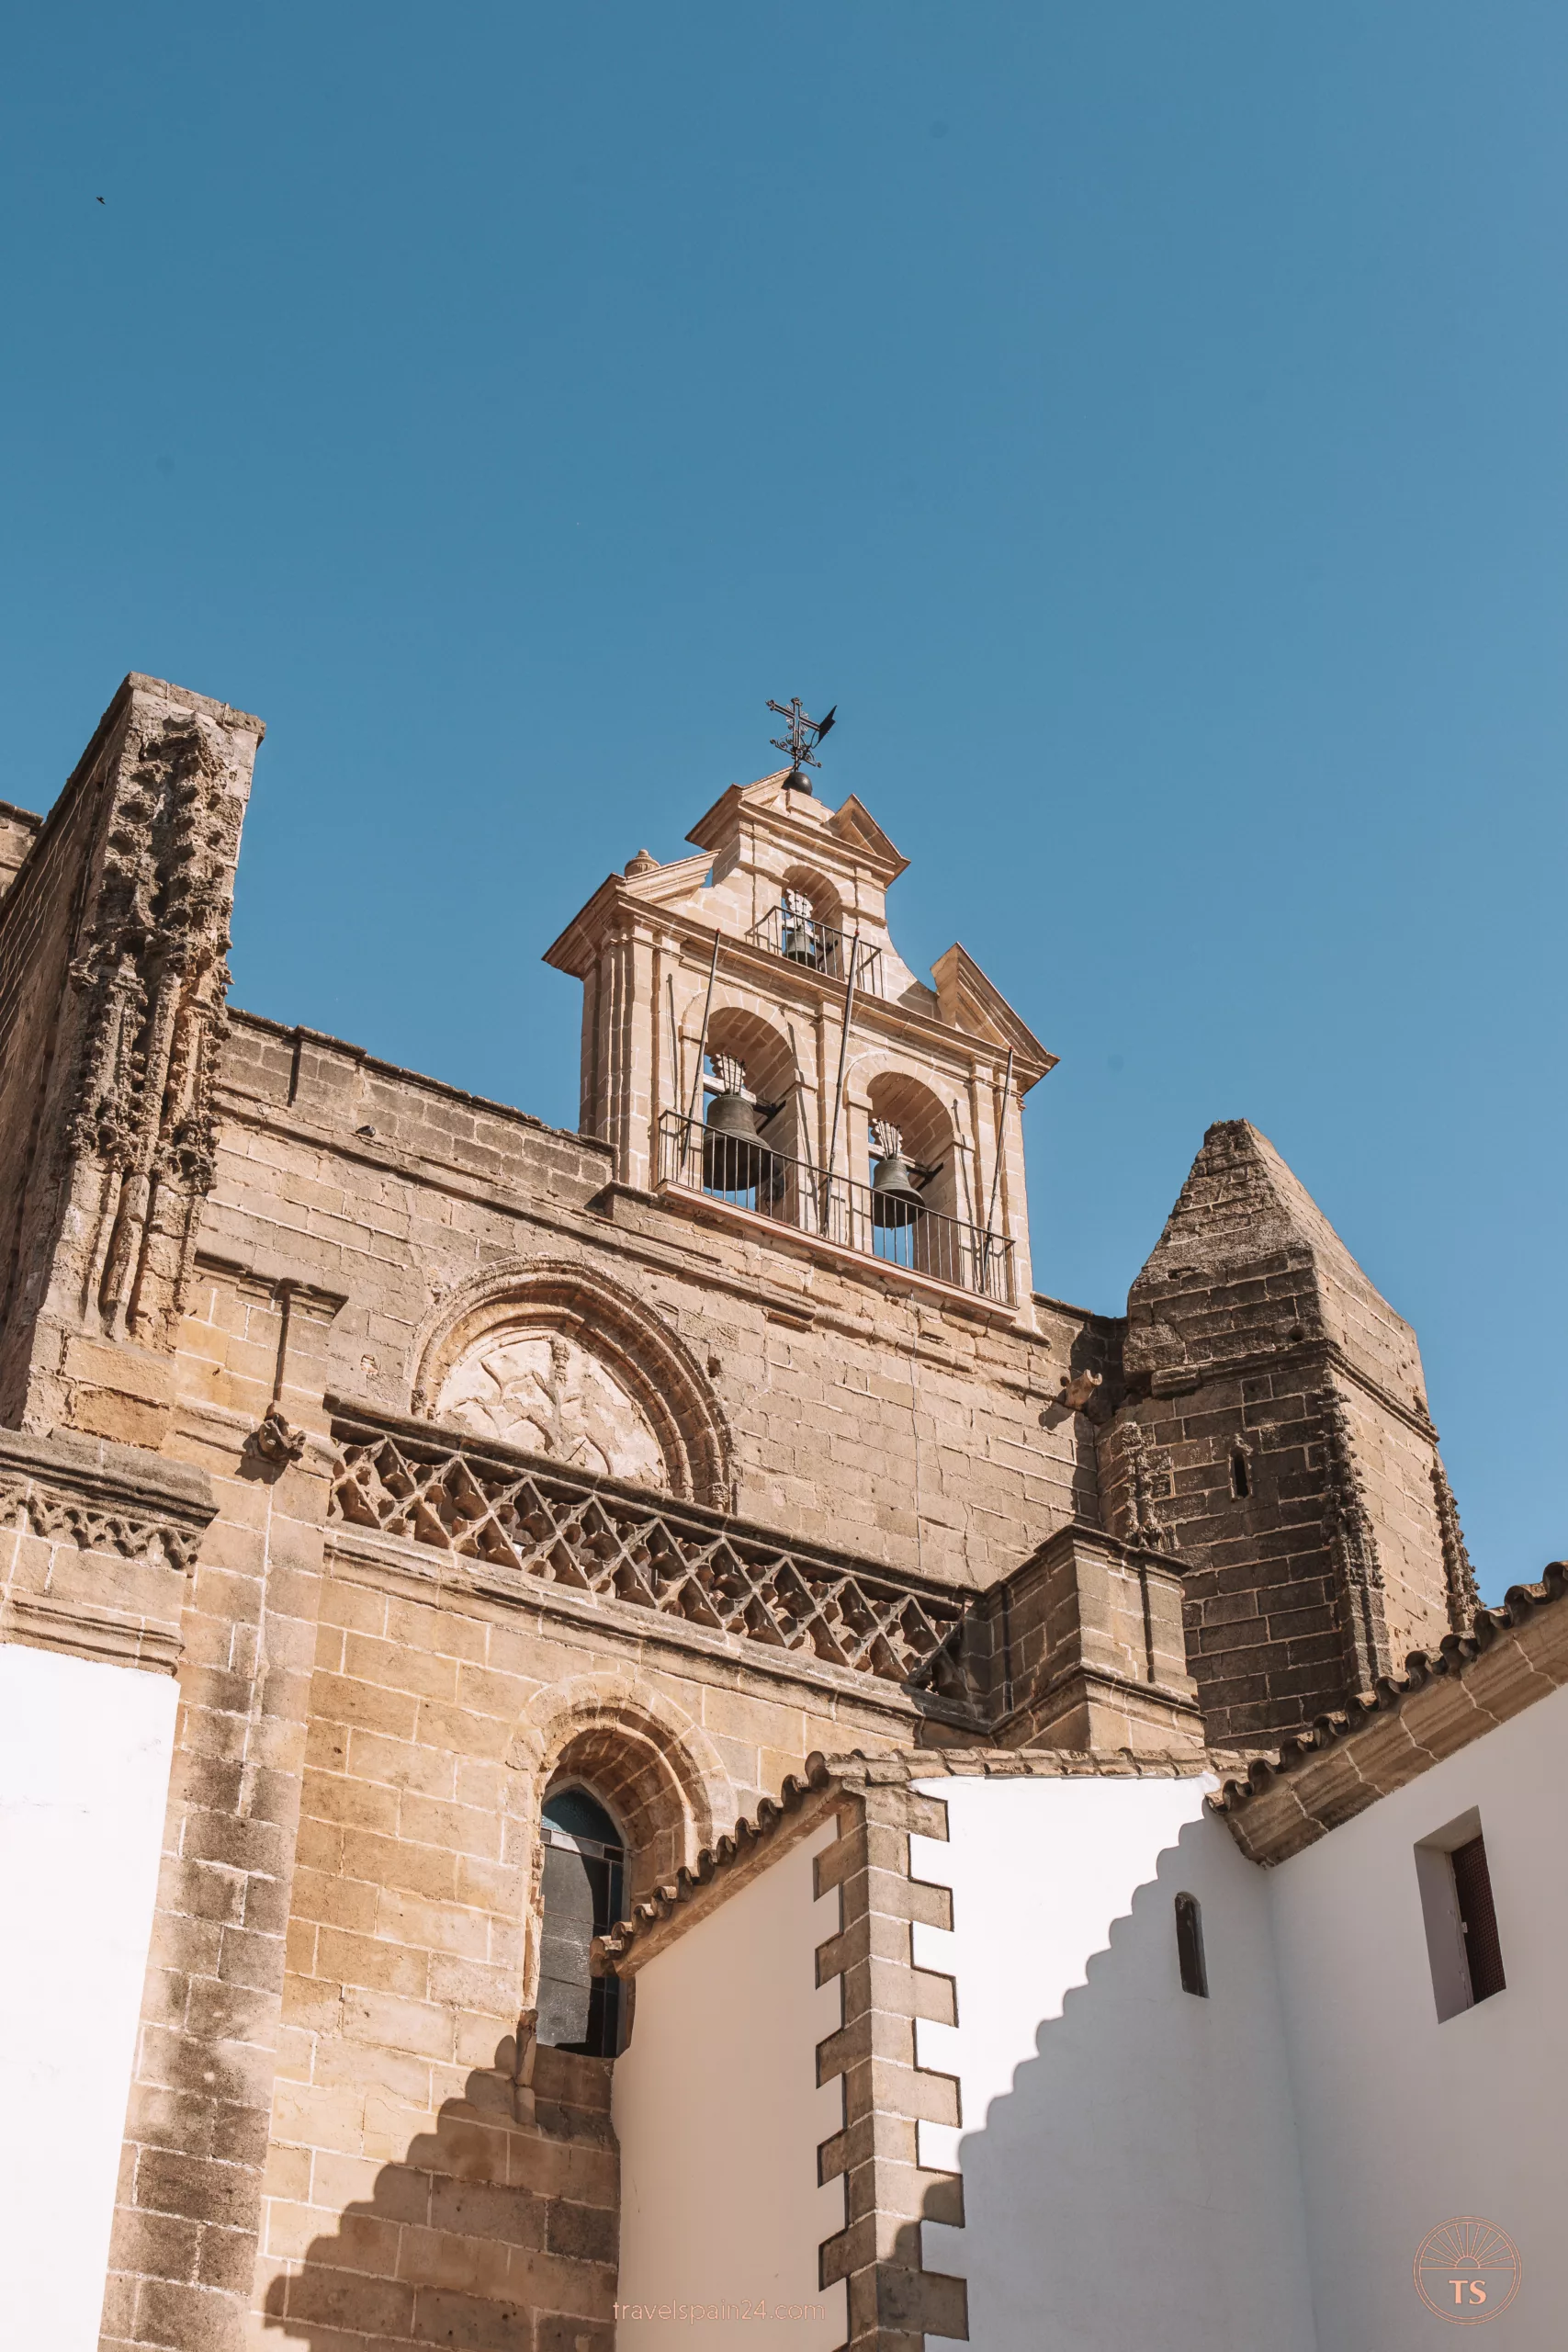 Close-up of the bells at Iglesia de San Mateo in Jerez de la Frontera, highlighting the architectural details. This image relates to the post by showcasing a significant historical and religious site in Jerez de la Frontera.